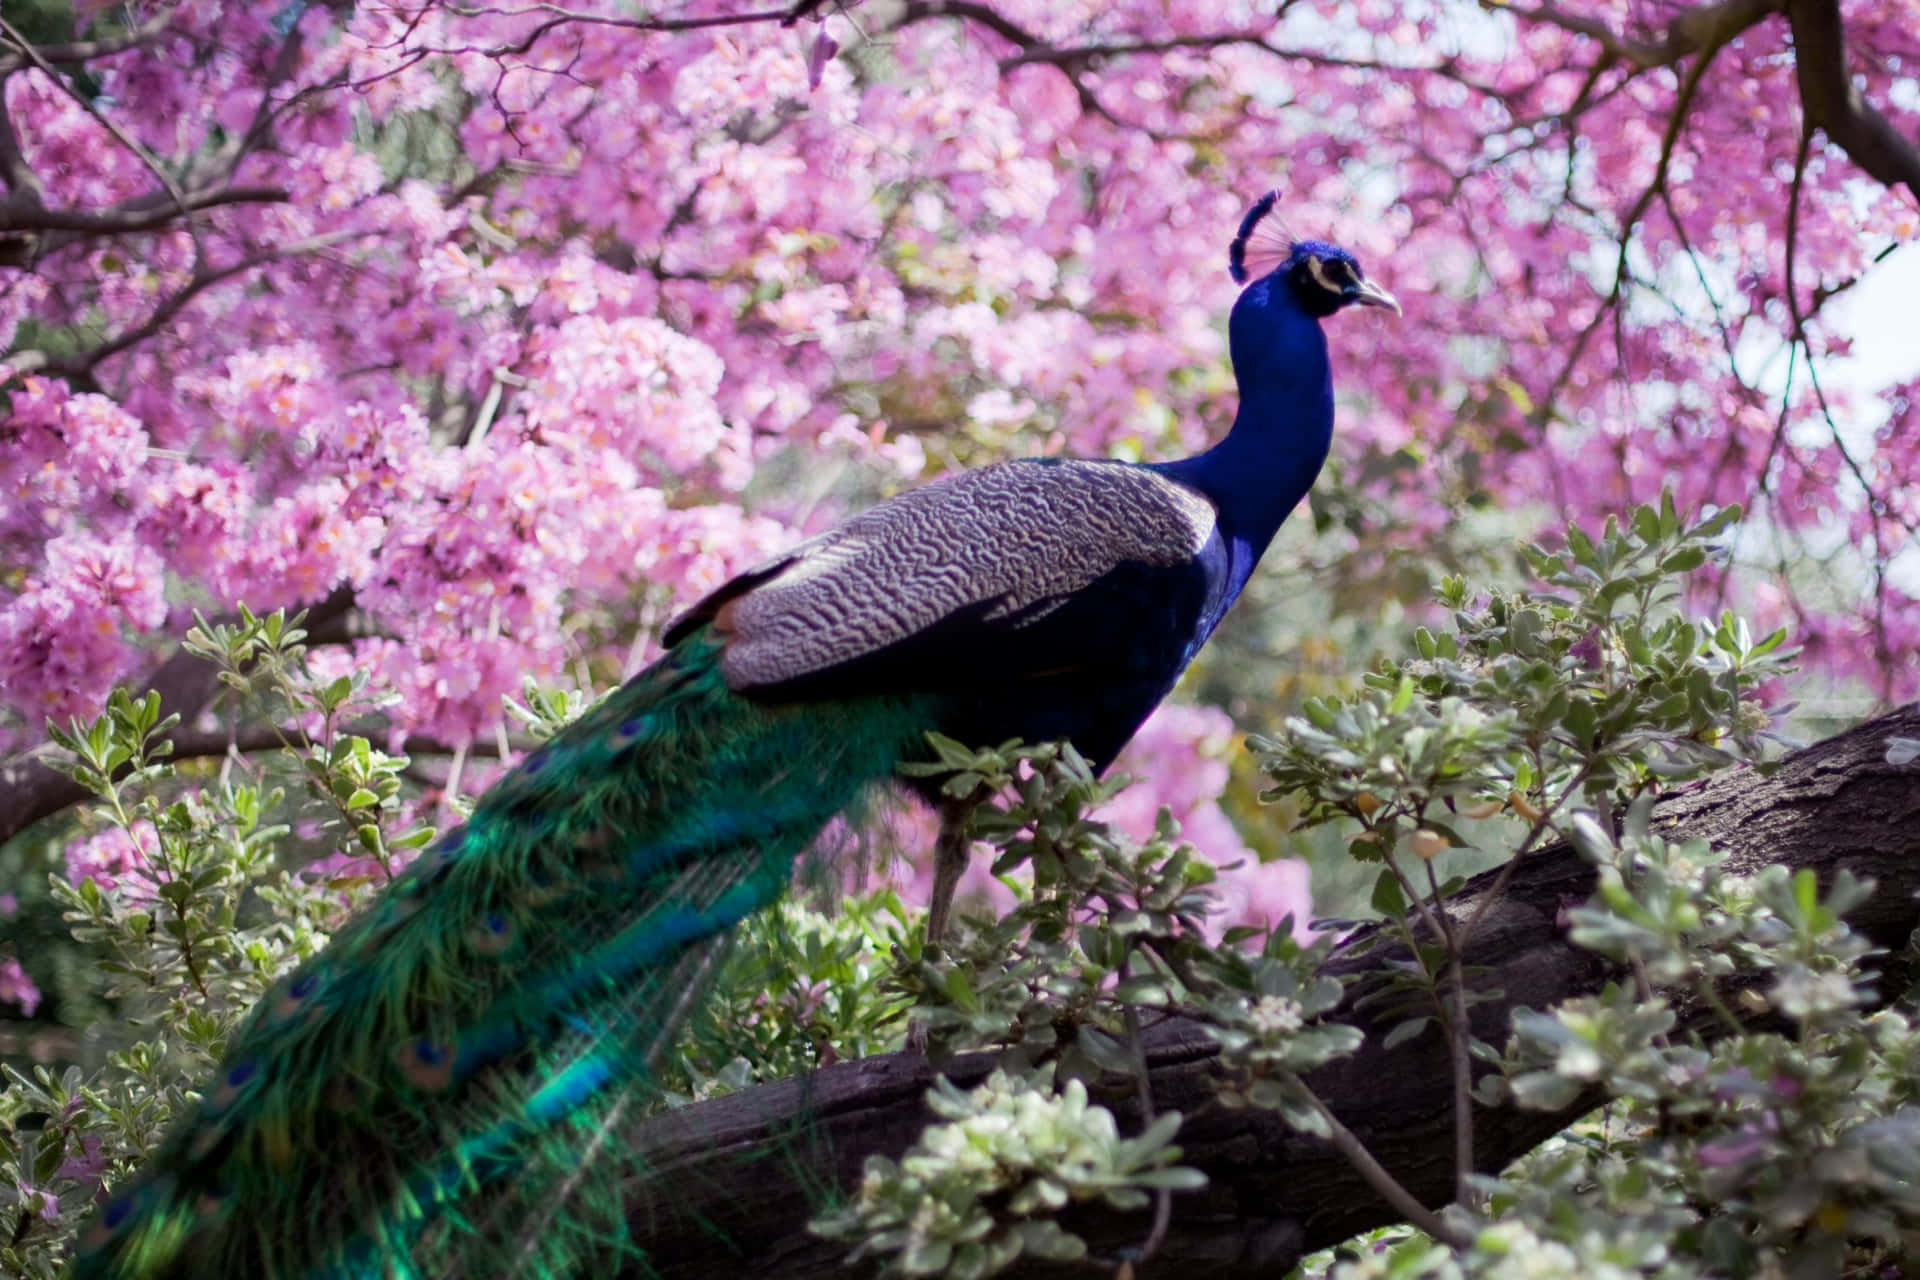 A Majestic Peacock Bird Struts its Unique and Colorful Plumes